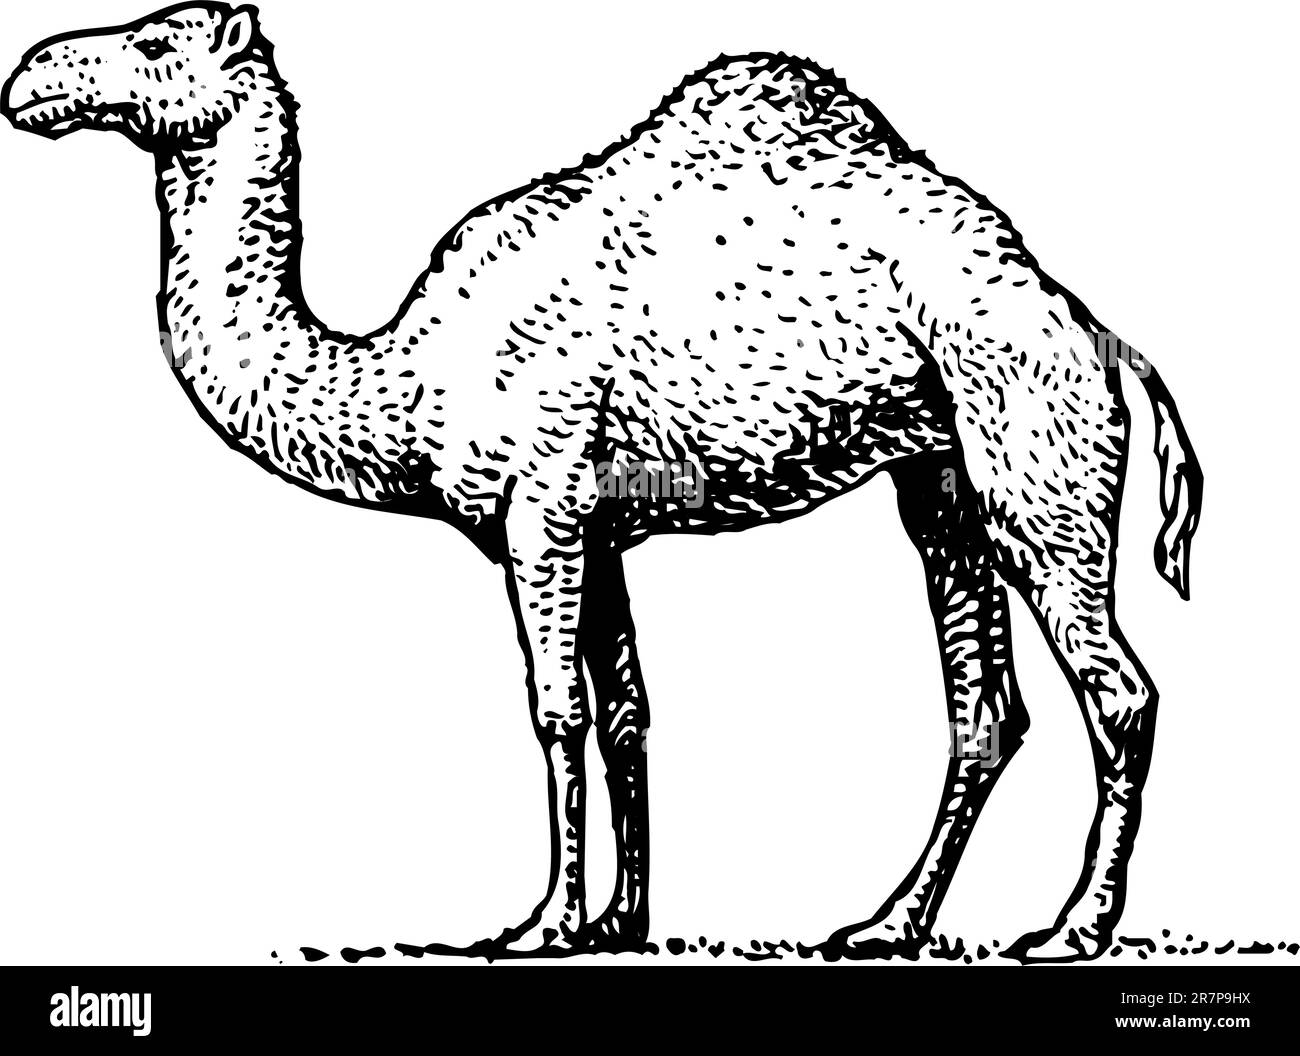 Cartoon Camel Cut Out Stock Images And Pictures Alamy